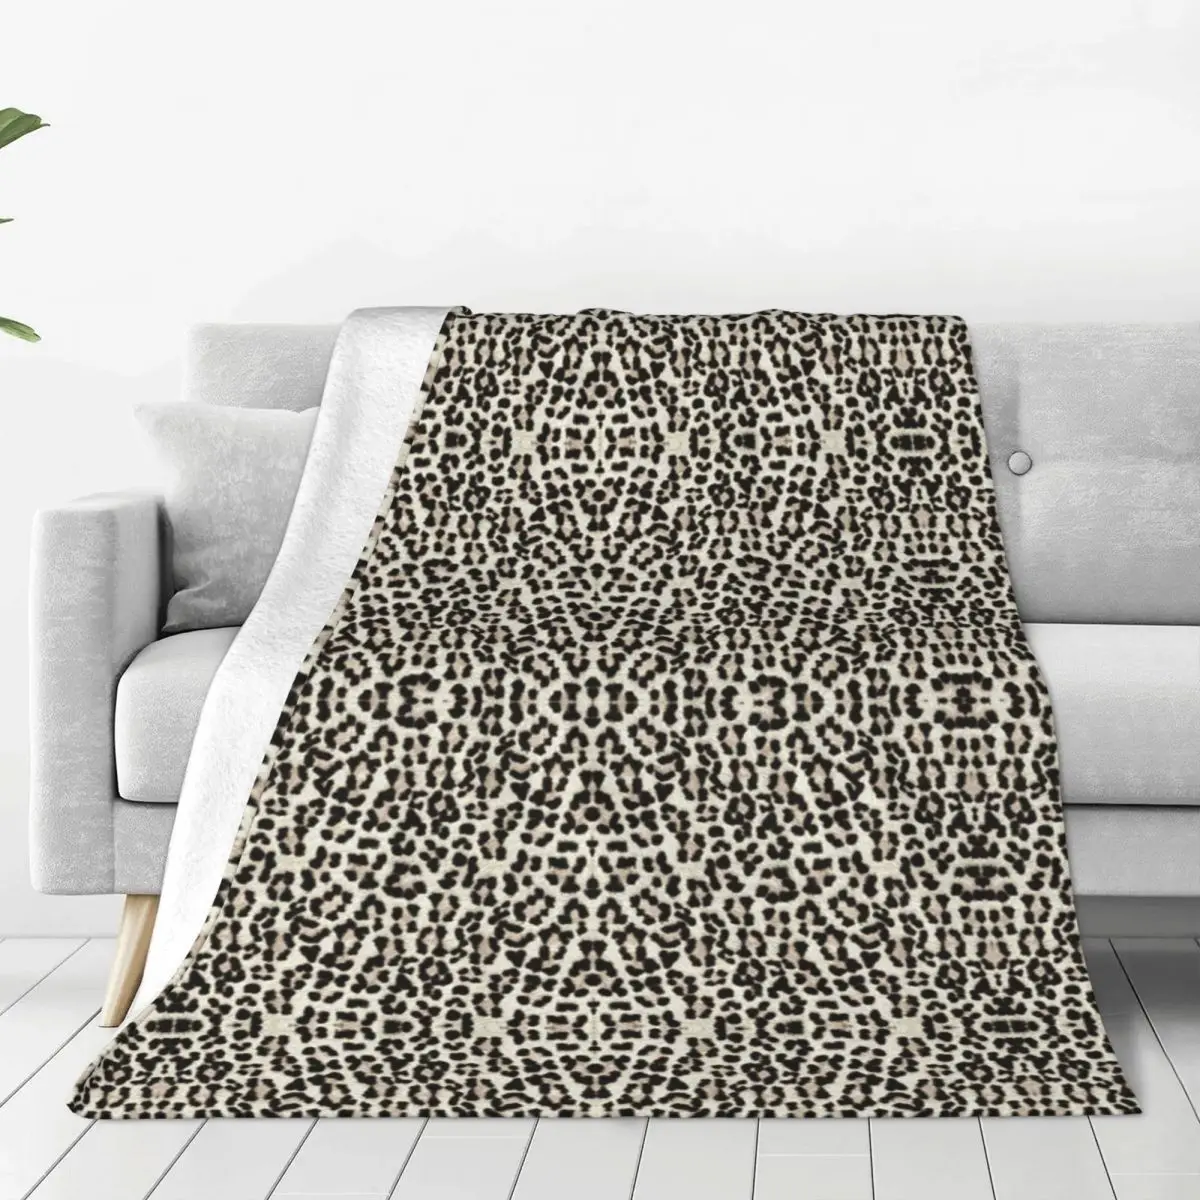 

Leopard Soft Fleece Throw Blanket Warm and Cozy for All Seasons Comfy Microfiber Blanket for Couch Sofa Bed 40"x30"